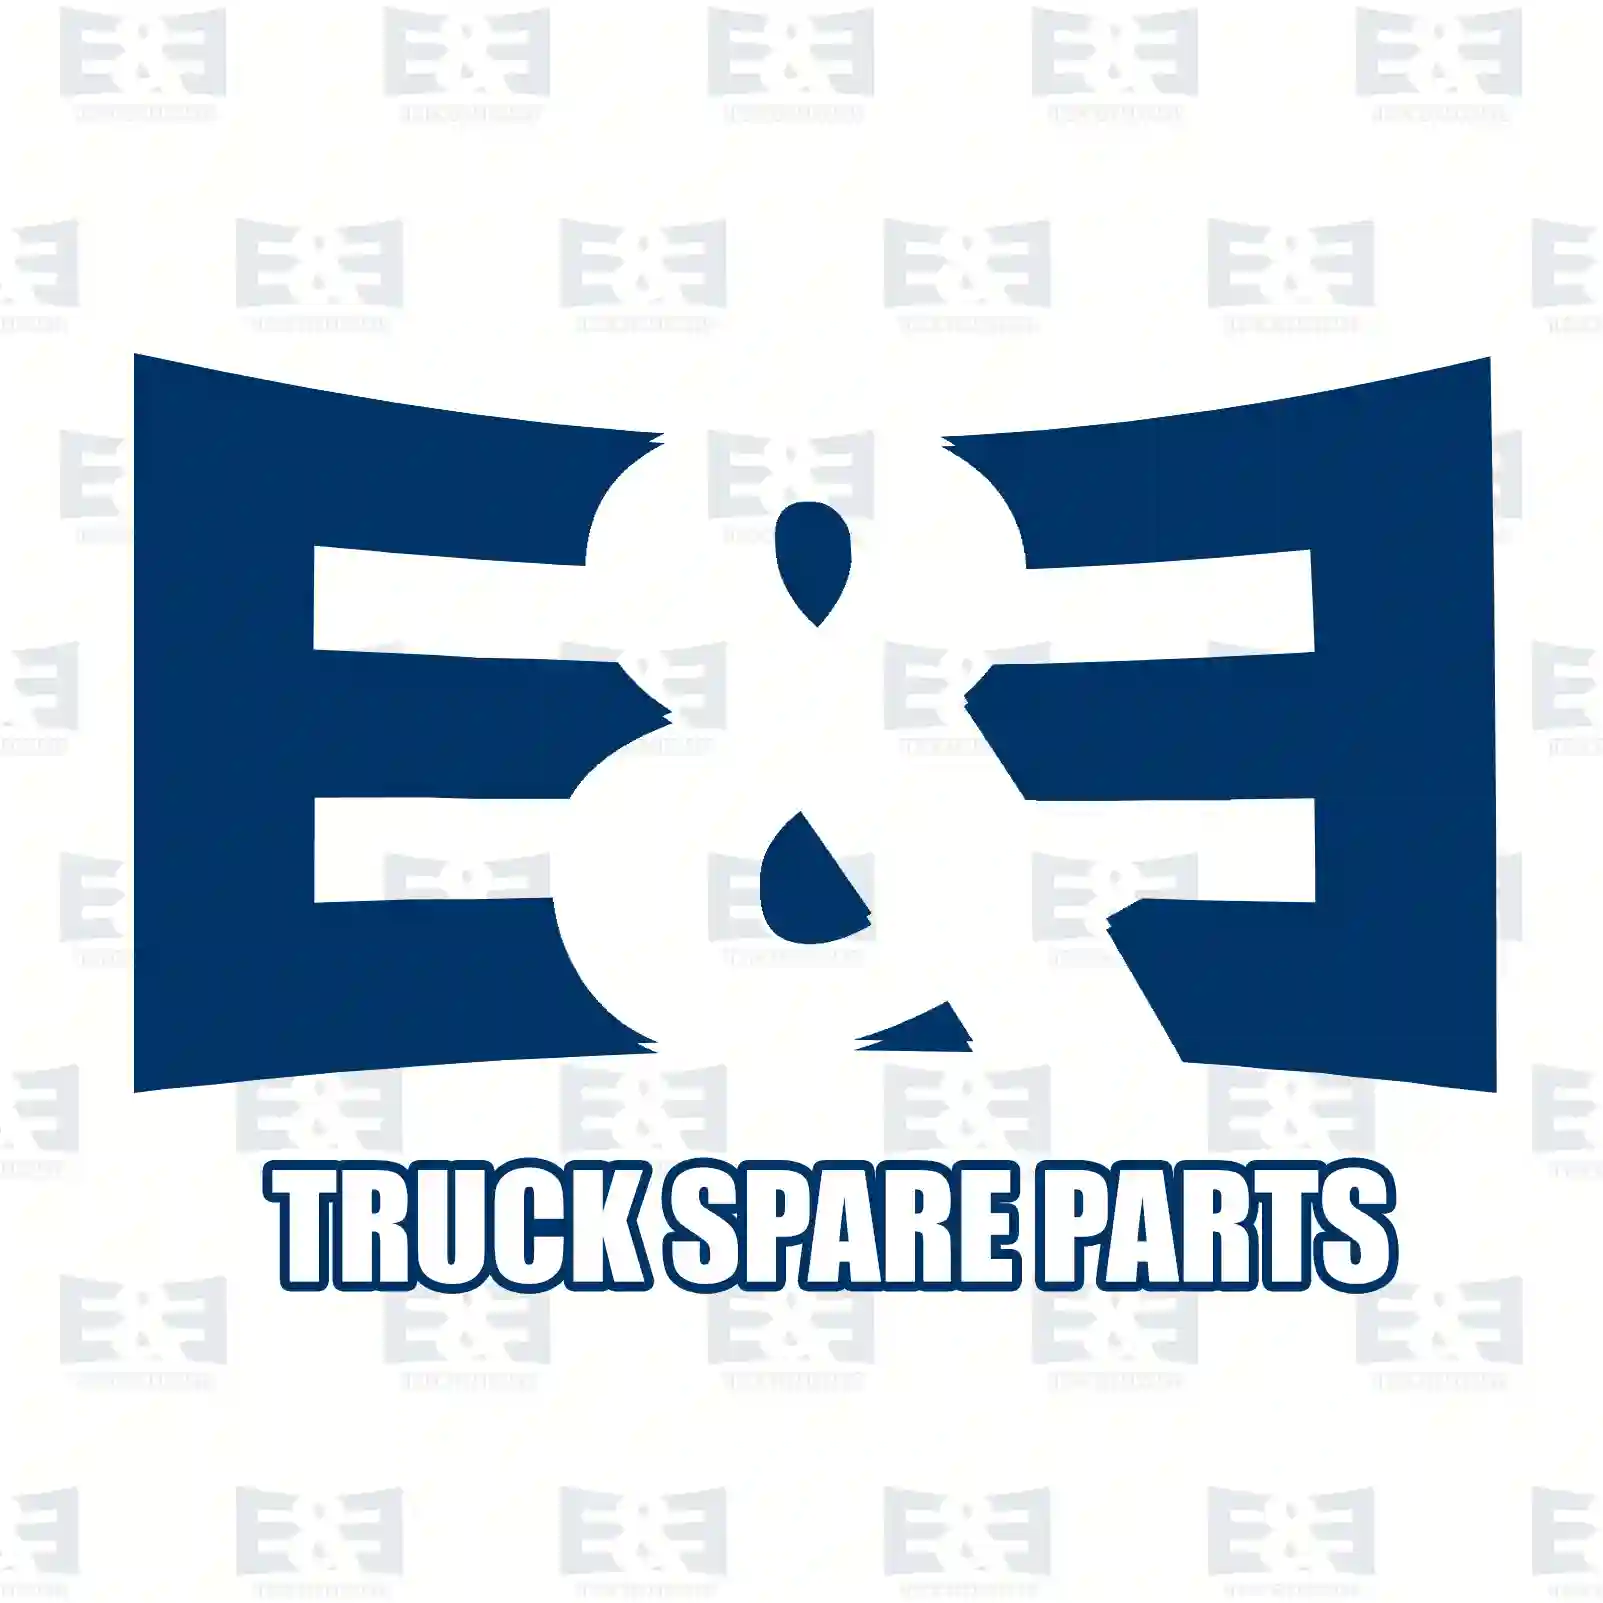  Bearing kit, starter || E&E Truck Spare Parts | Truck Spare Parts, Auotomotive Spare Parts